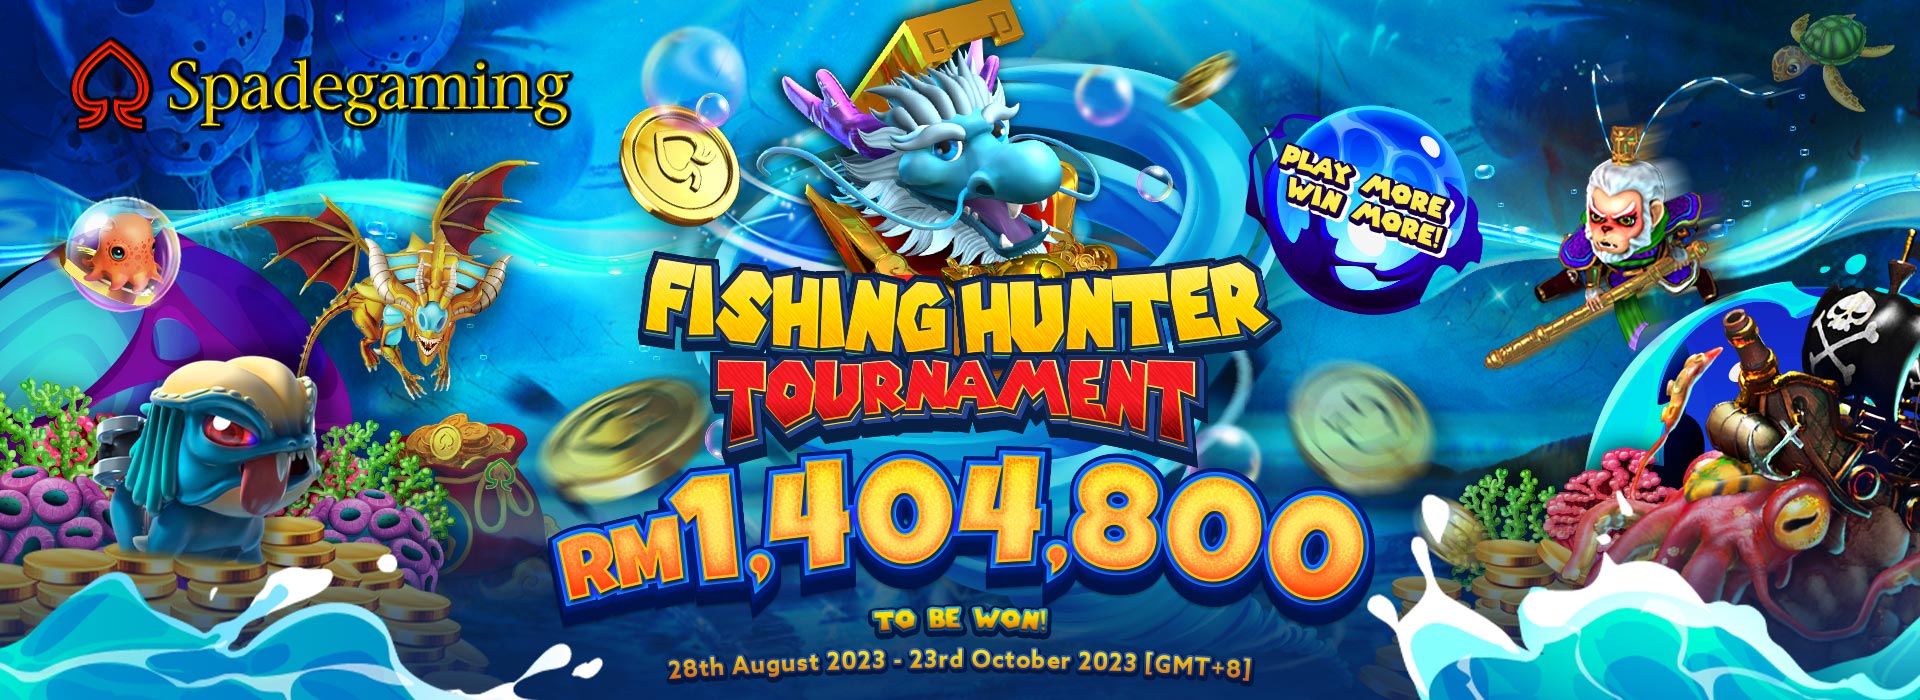 Spadegaming’s Grand Fishing Hunter Tournament! Play More! Win More!!Total Cash Prize Up to $351,200